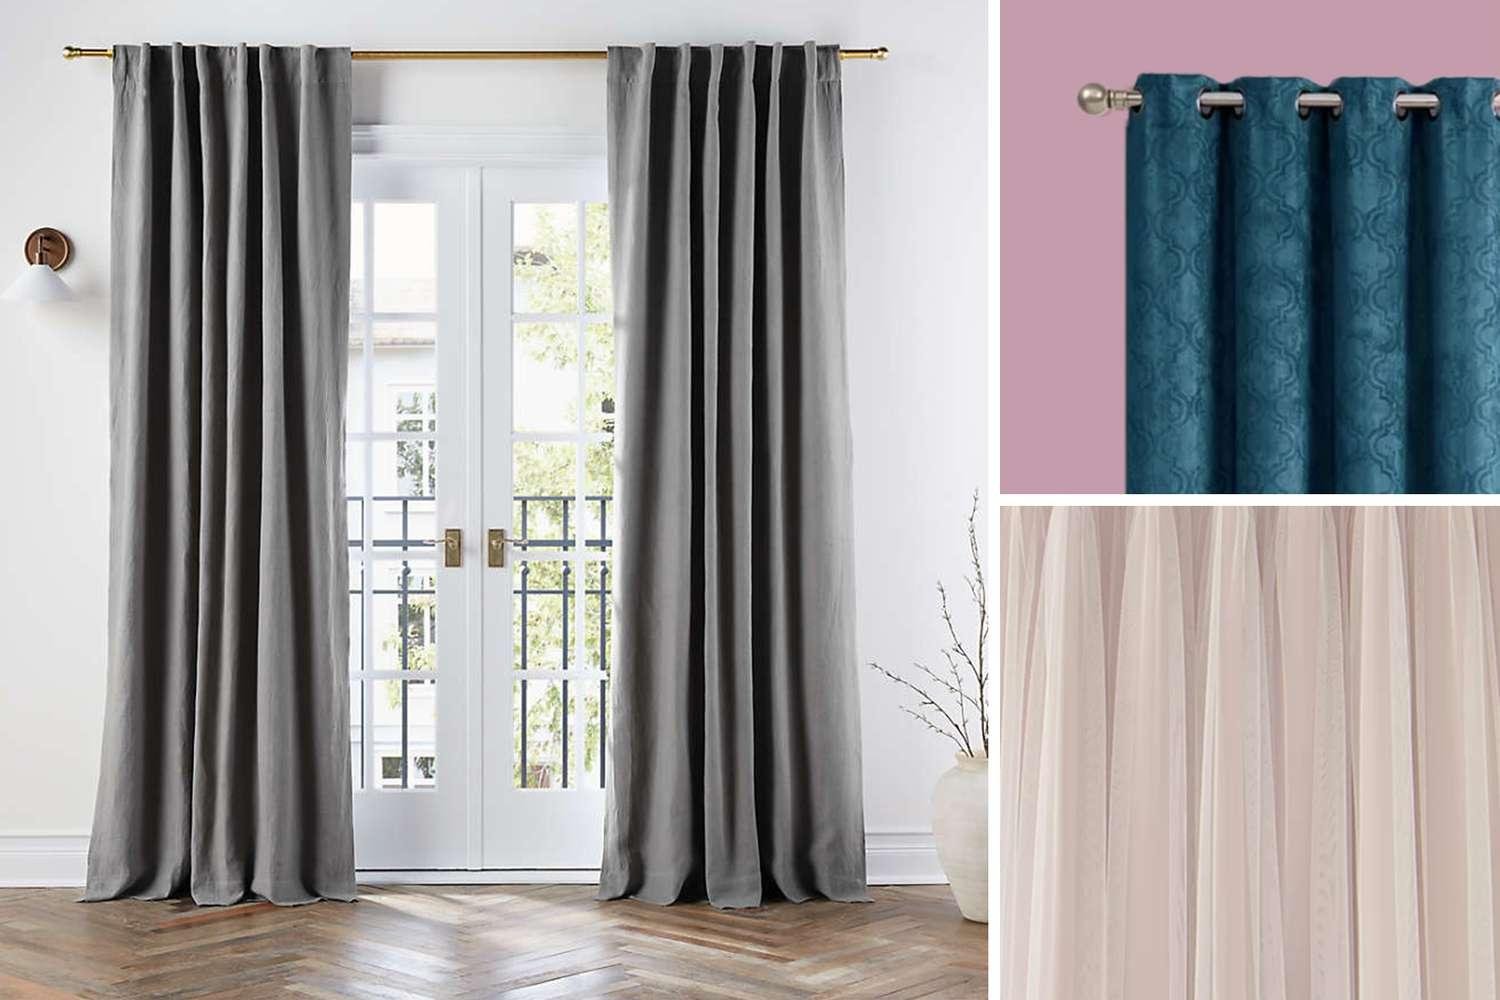 dropshipping products - Blackout curtains